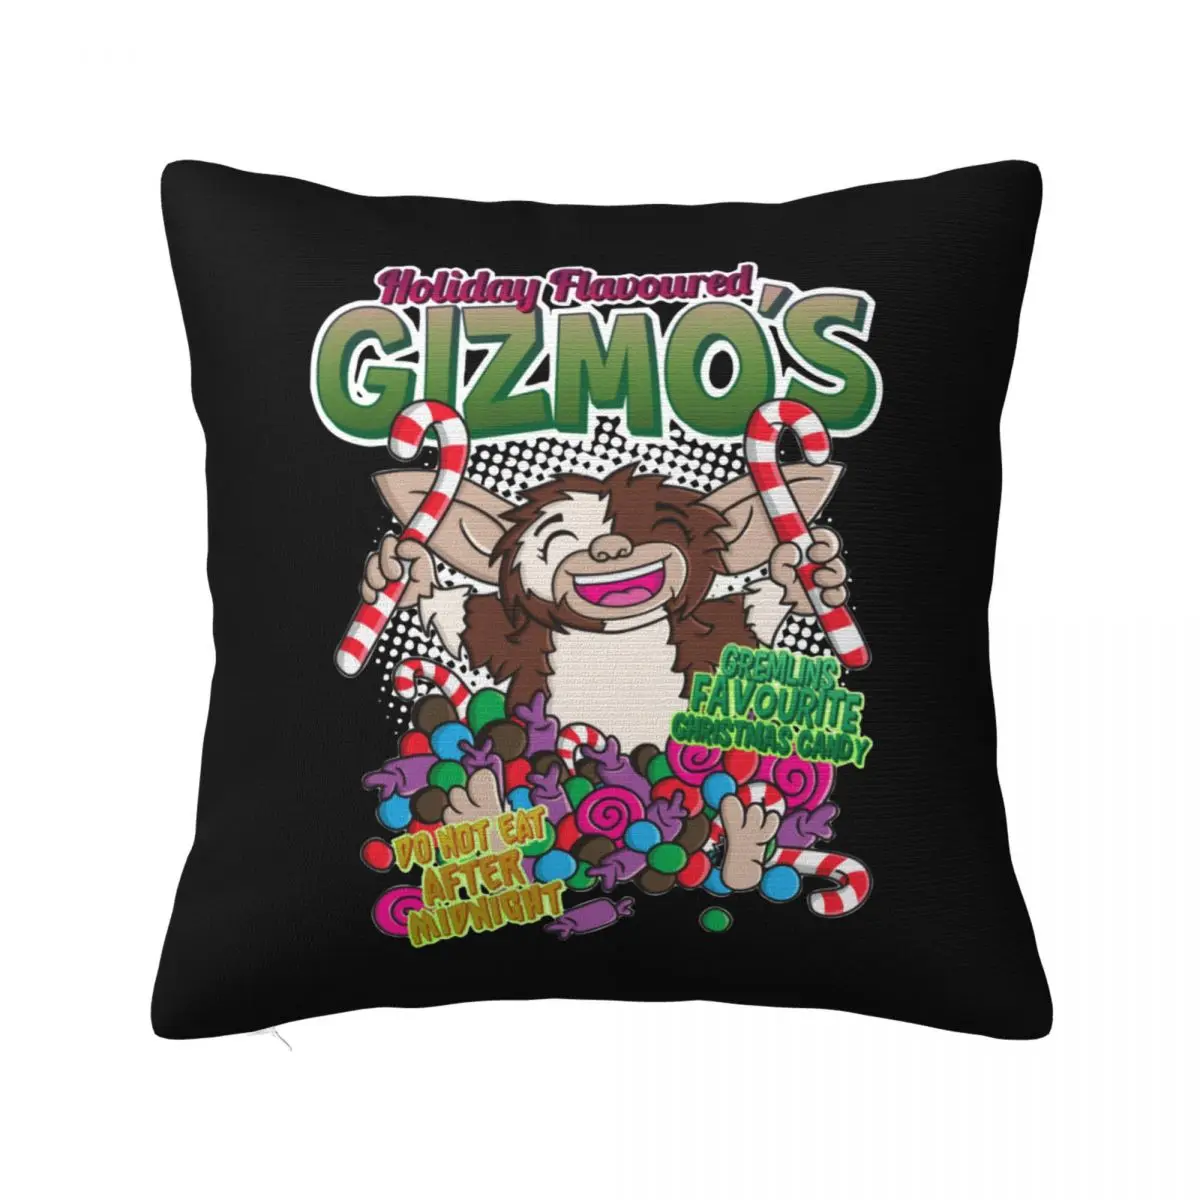 

Vintage Gremlins Christmas Pillowcase Printing Fabric Cushion Cover 1984 Movies Throw Pillow Case Cover Home Zippered 45*45cm